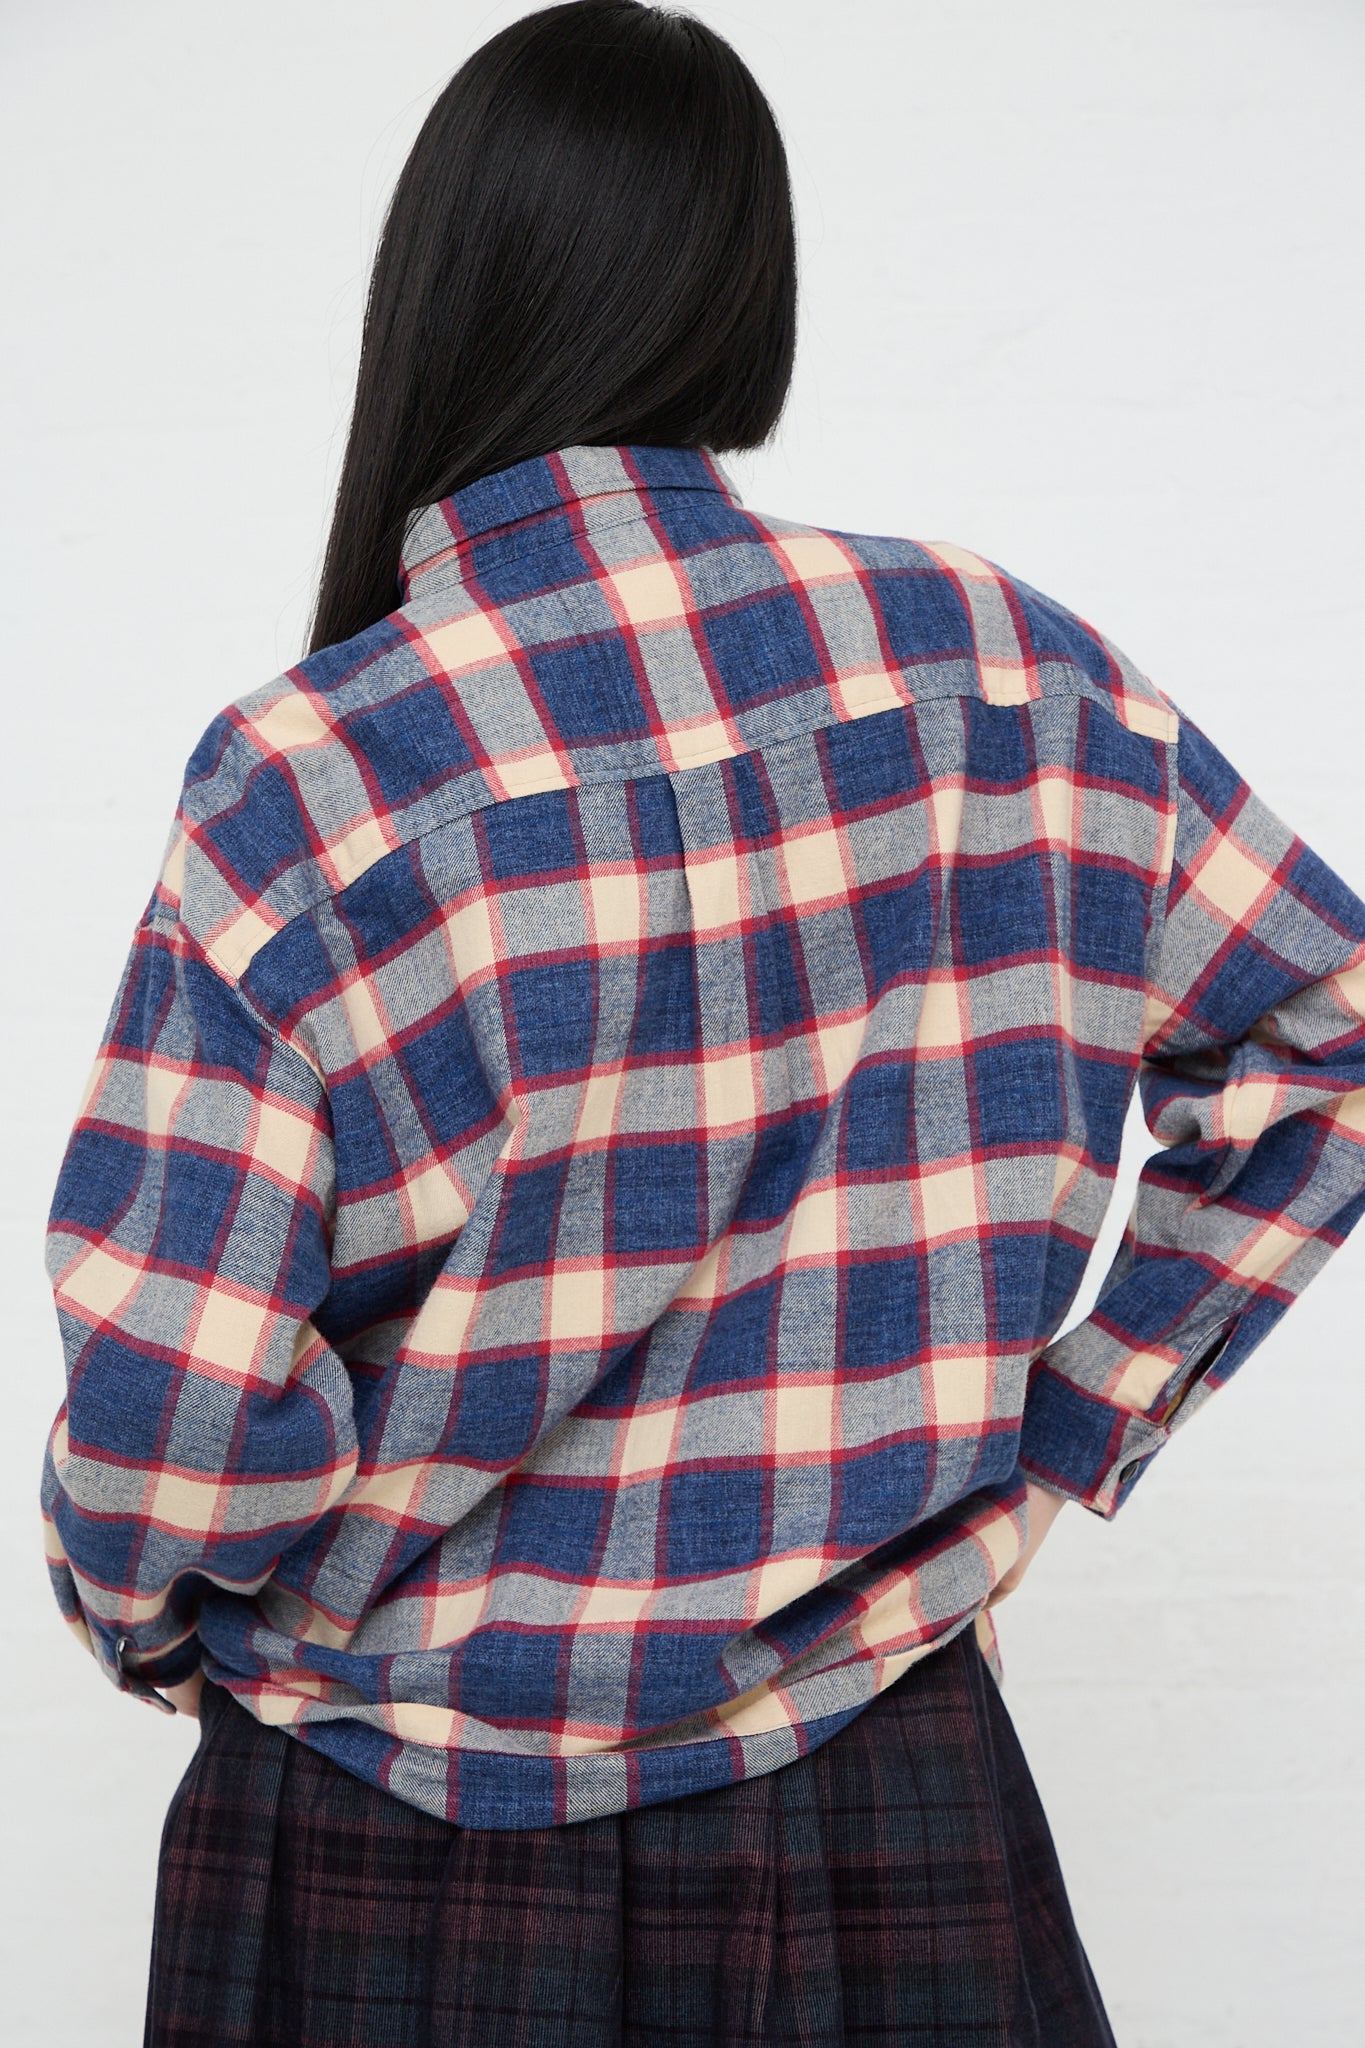 The back of a woman wearing an Ichi Woven Cotton Shirt in Ivory and Navy, made of woven cotton.